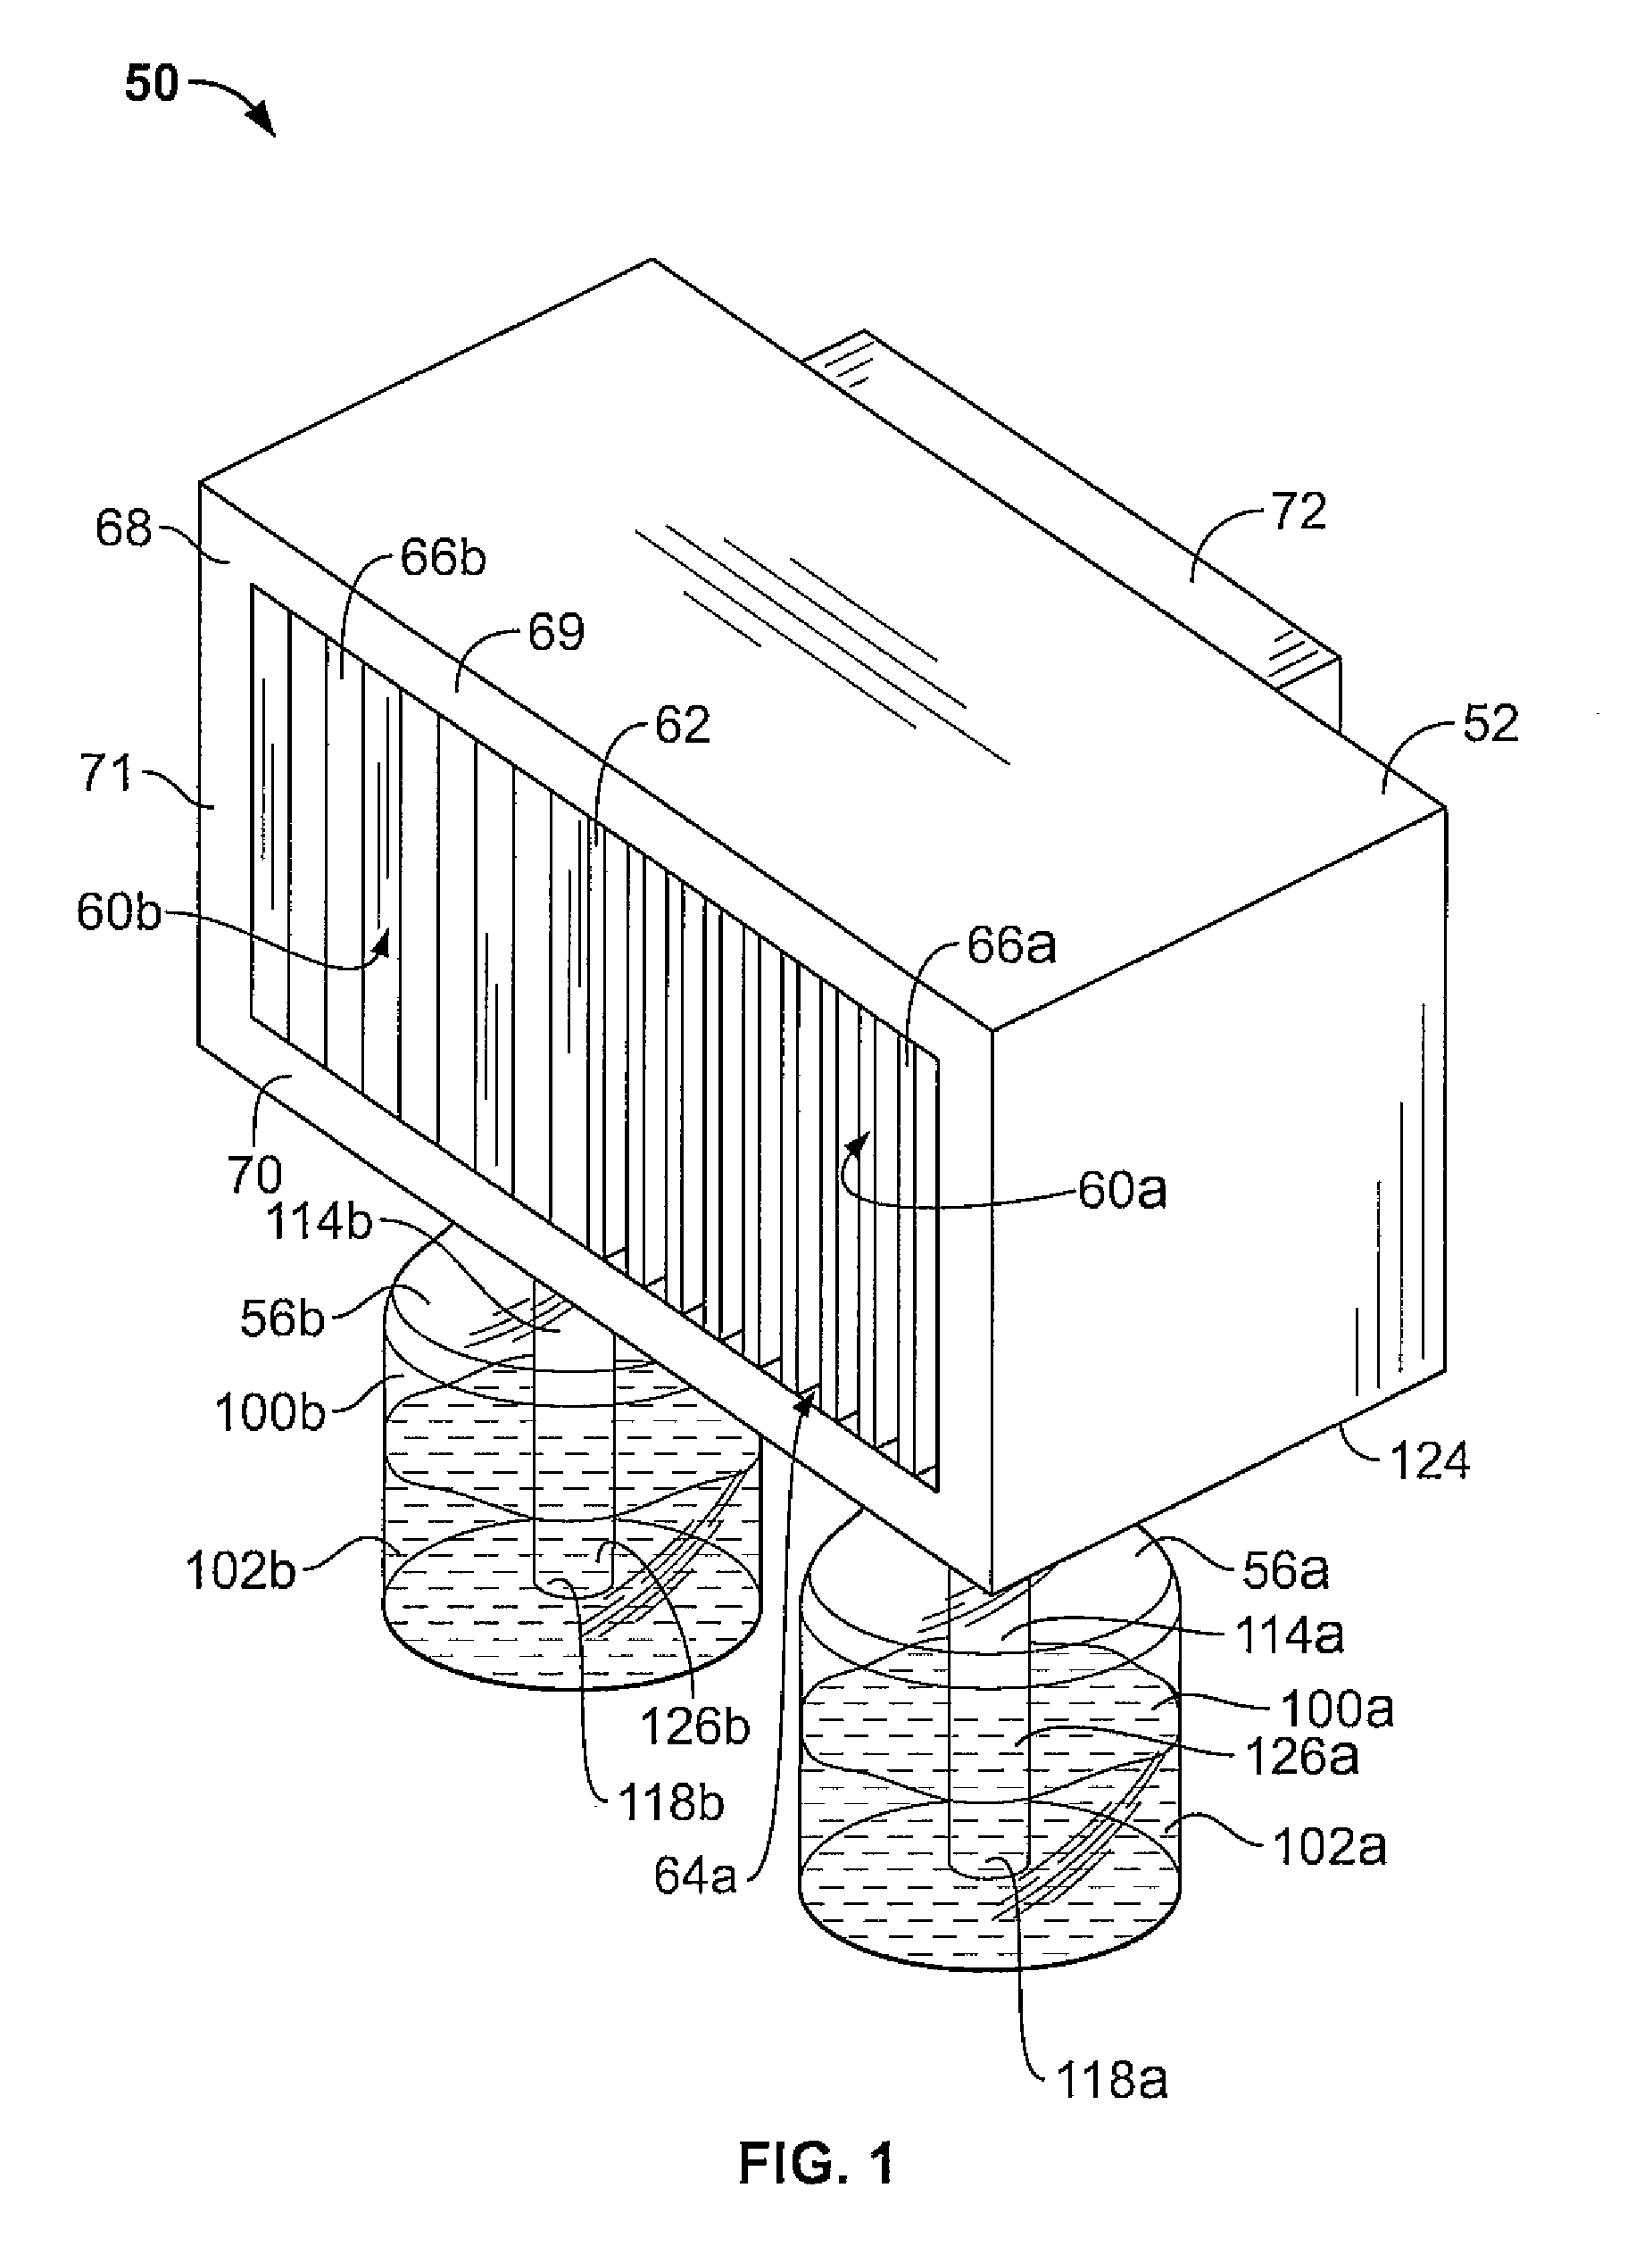 Method and Apparatus for Dispensing a Fragrance